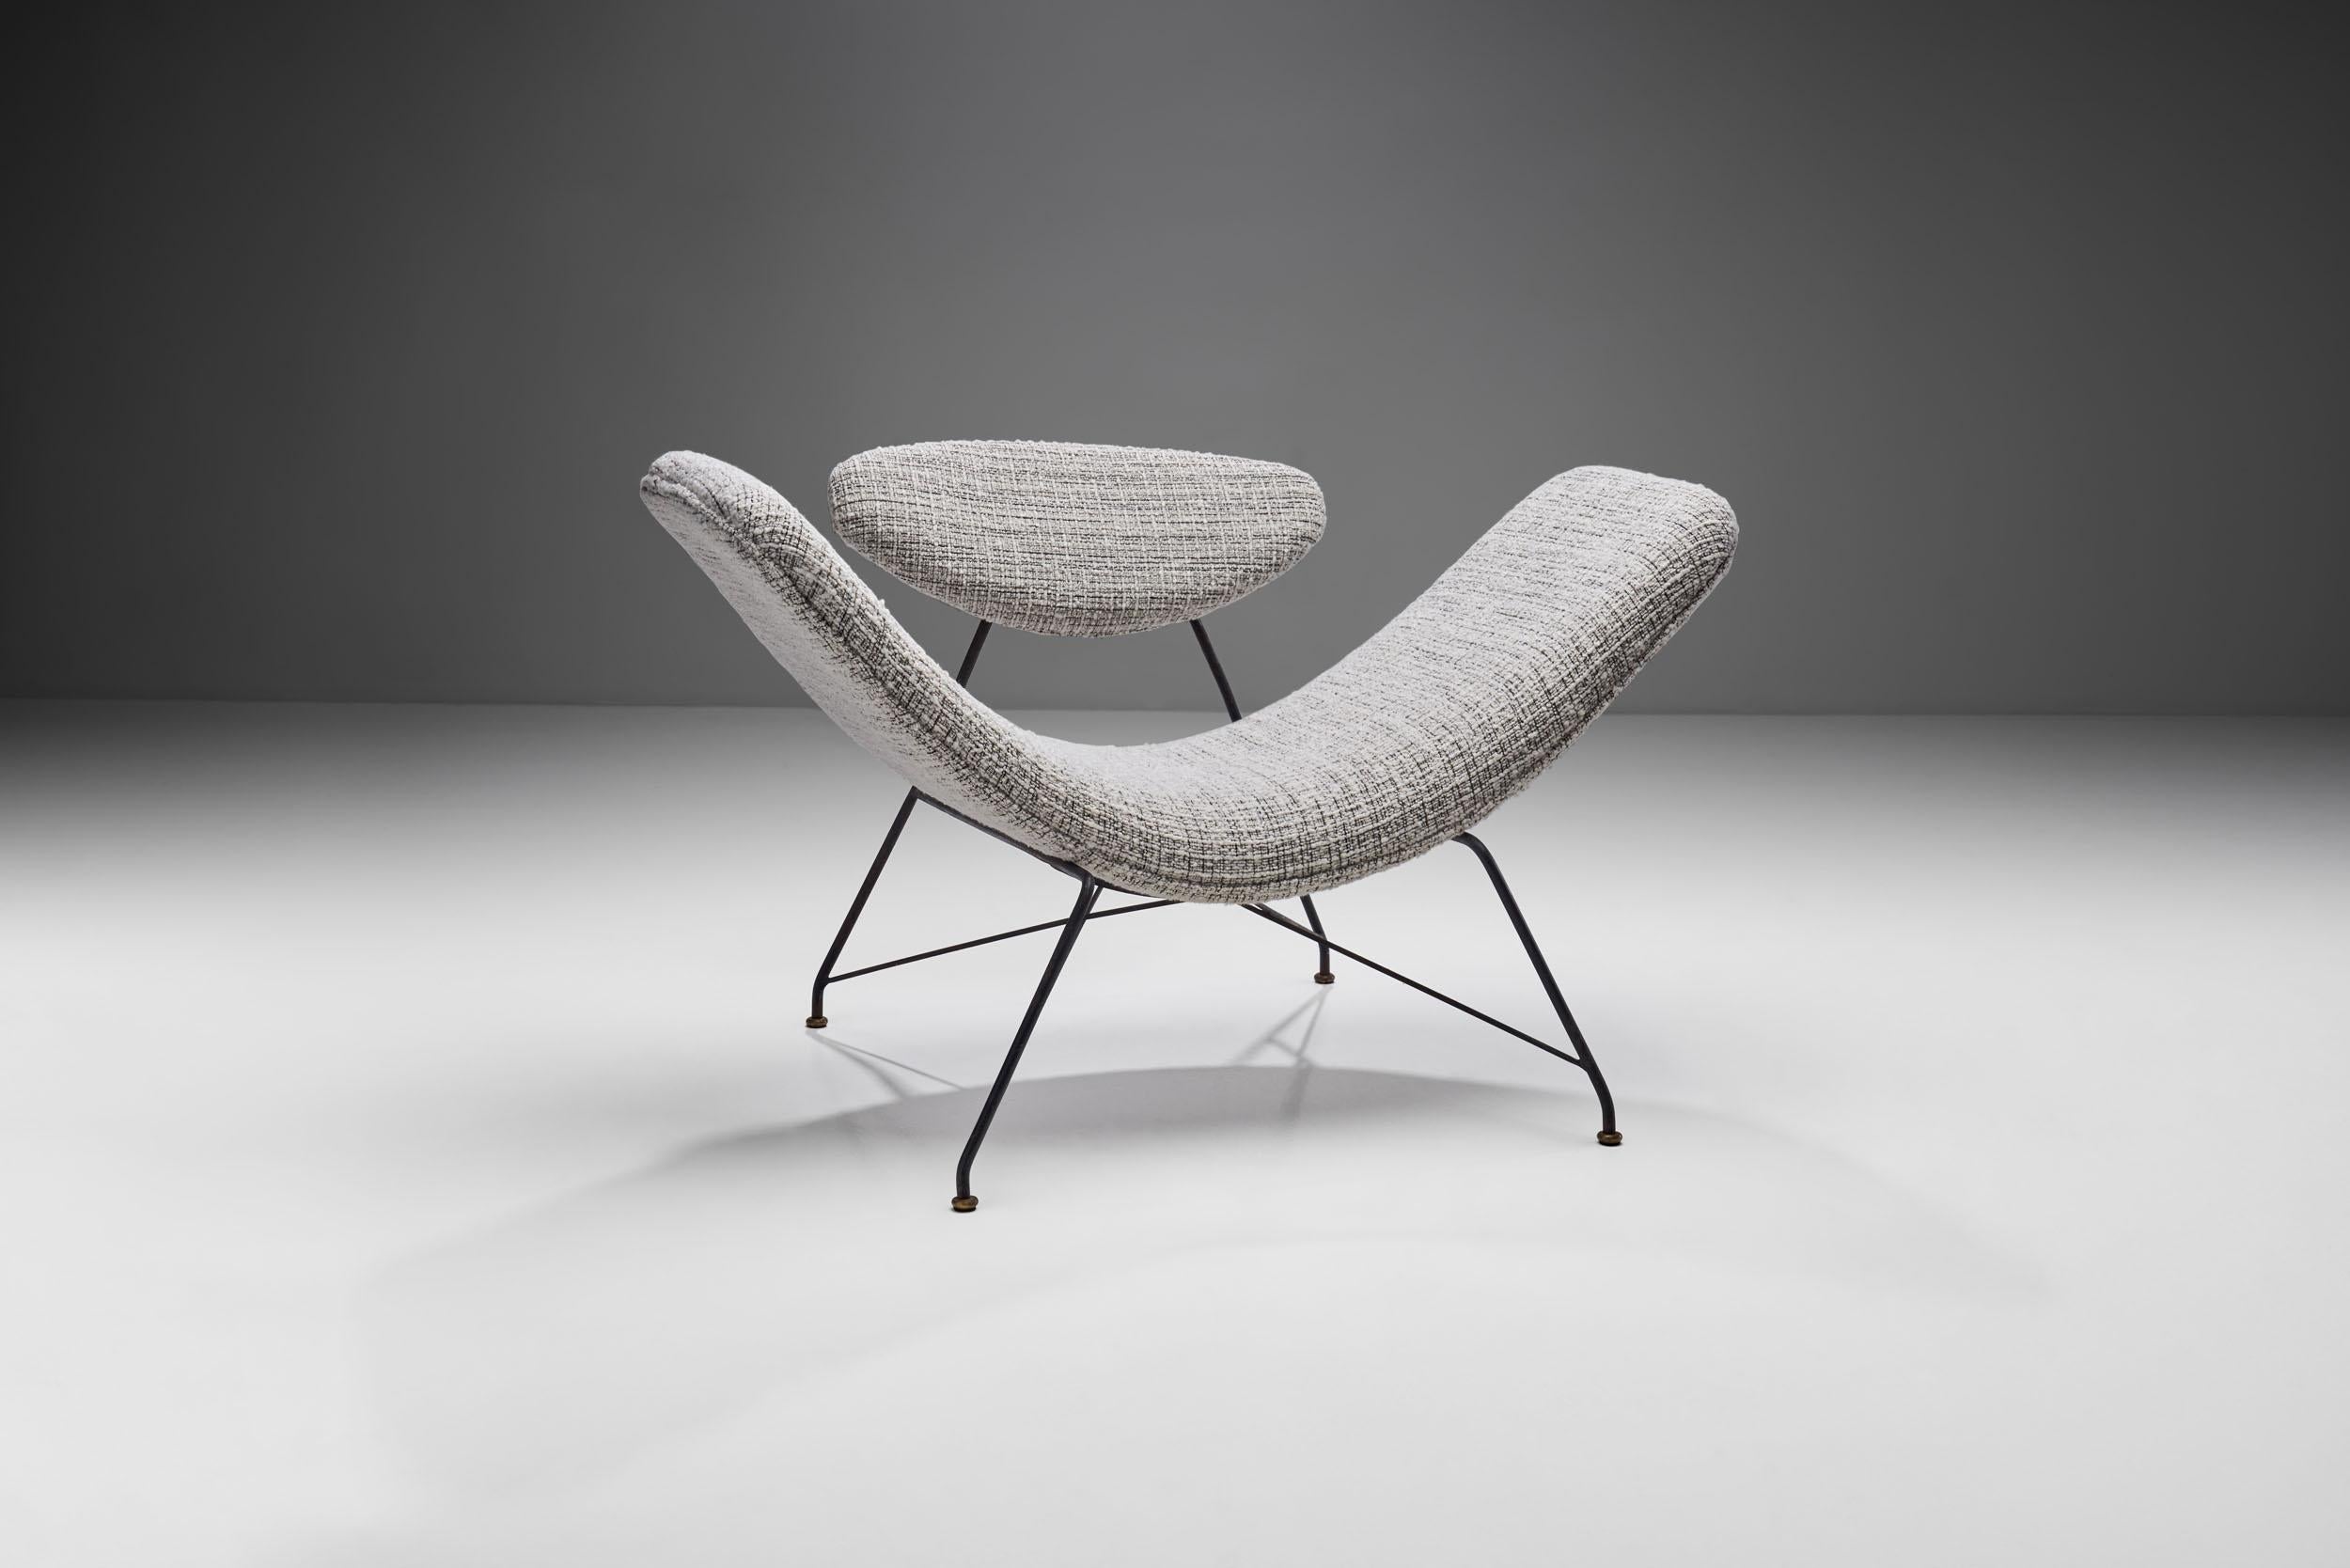 This “Reversivel” (Reversible) chair is without a doubt a Brazilian design icon. It is considered to be one of the most emblematic armchairs of Brazilian Modern Design. Martin Eisler designed this sculptural armchair in 1955.

The uniqueness of